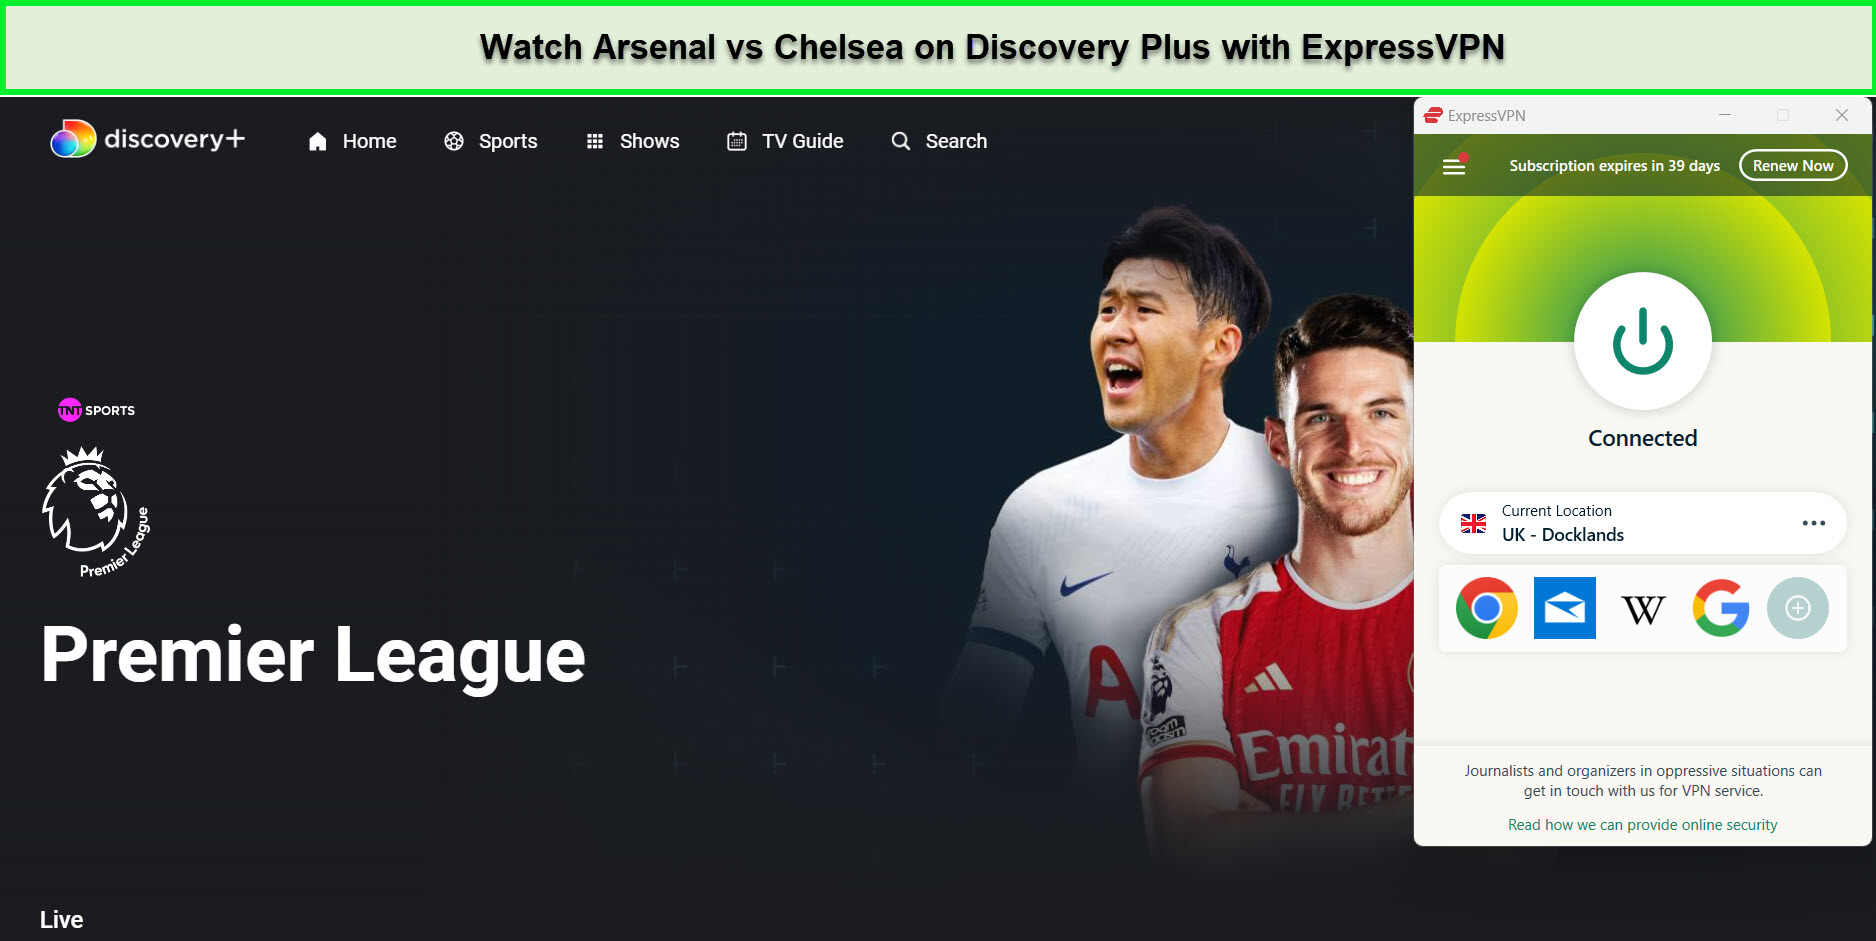 Watch-Arsenal-vs-Chelsea-in-USA-on-Discovery-Plus-with-ExpressVPN